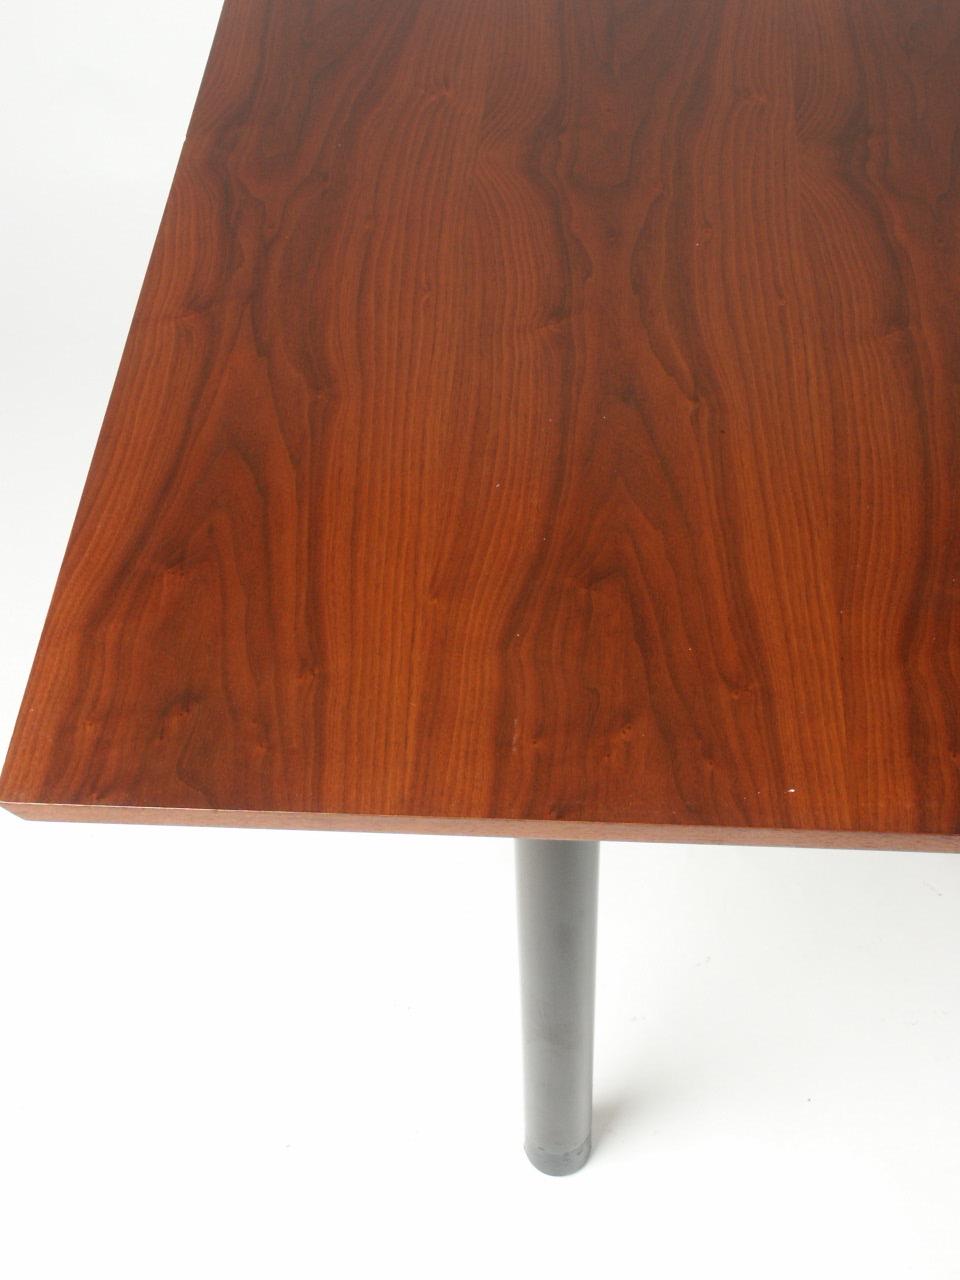 Stained  Edward Wormley for Dunbar 1950s Asian Influence Walnut Extension Dining Table For Sale